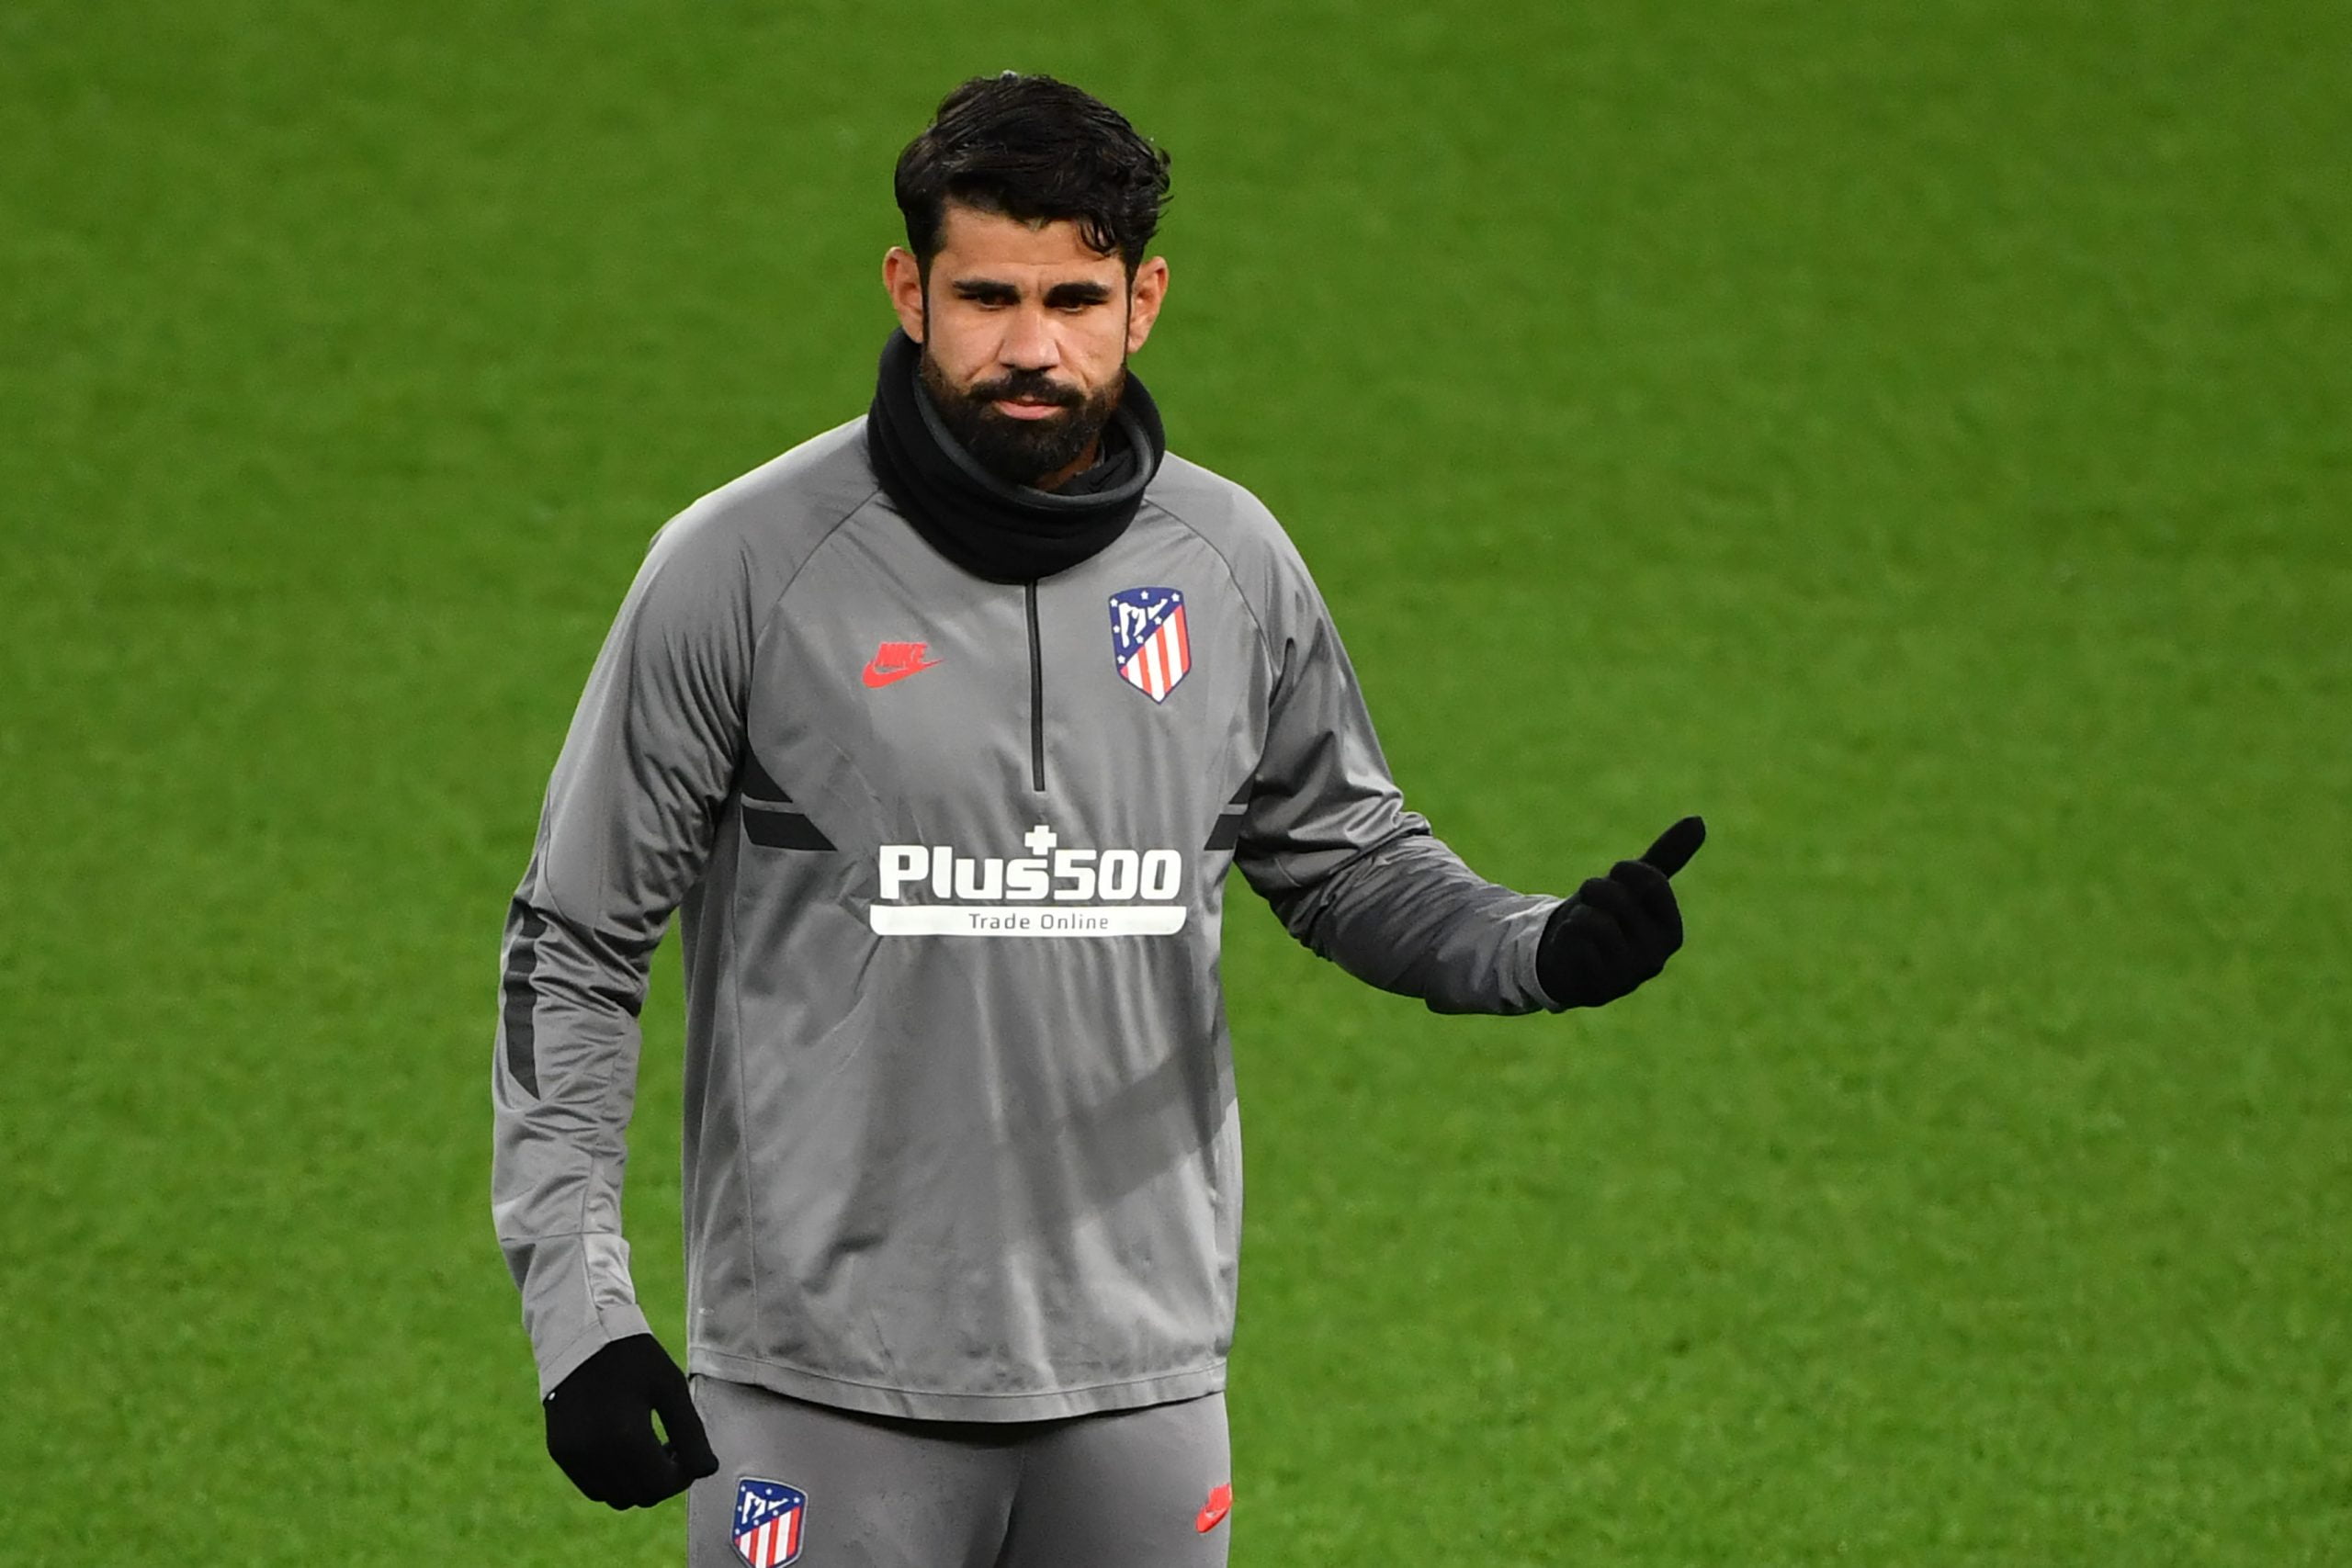 Wolves could face competition from Sao Paulo for Diego Costa who is seen in the picture